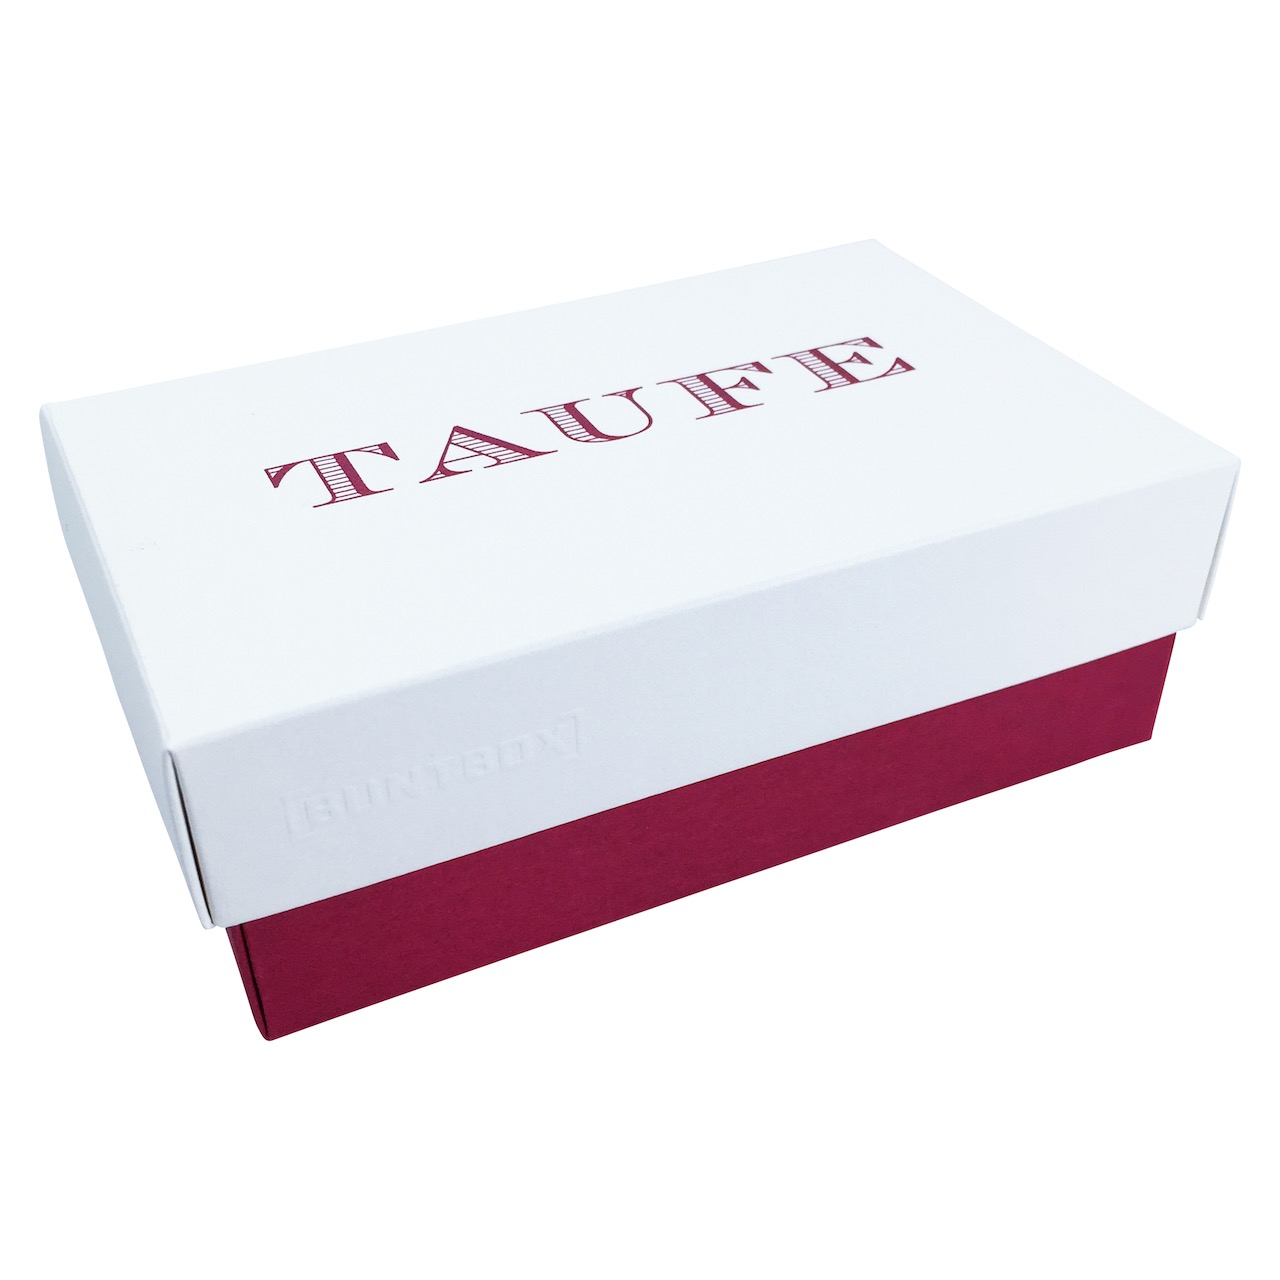 Fine Paper Edition Buntbox Champagner - Bordeaux 'Taufe' - Rot